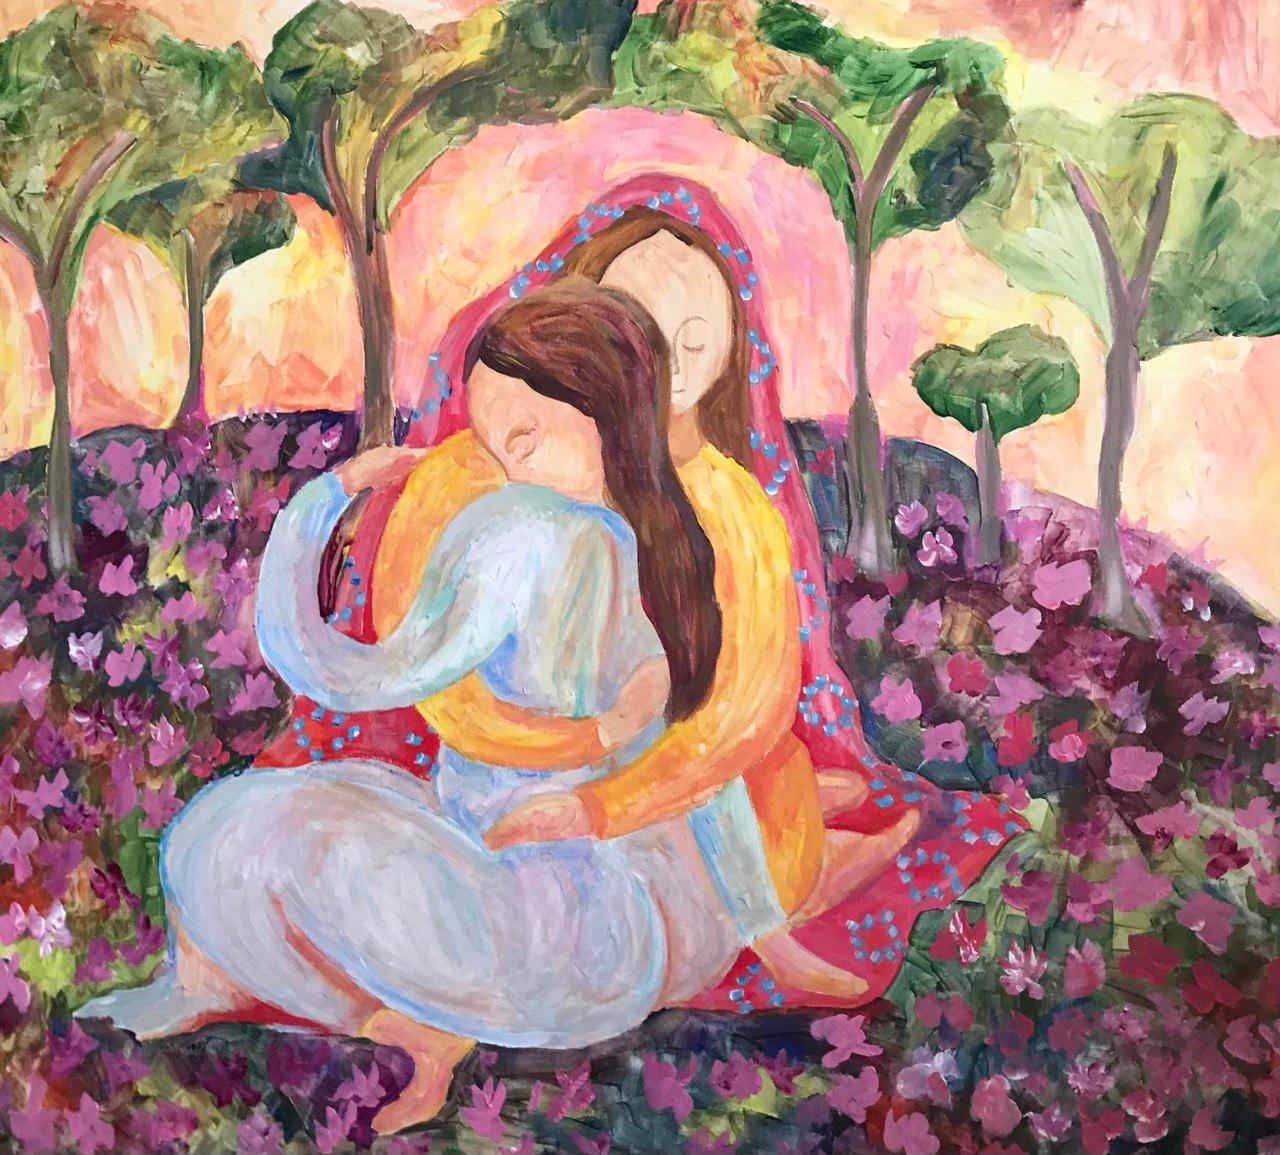 Sister, we are under the protection of our garden by Tetiana Pchelnykova